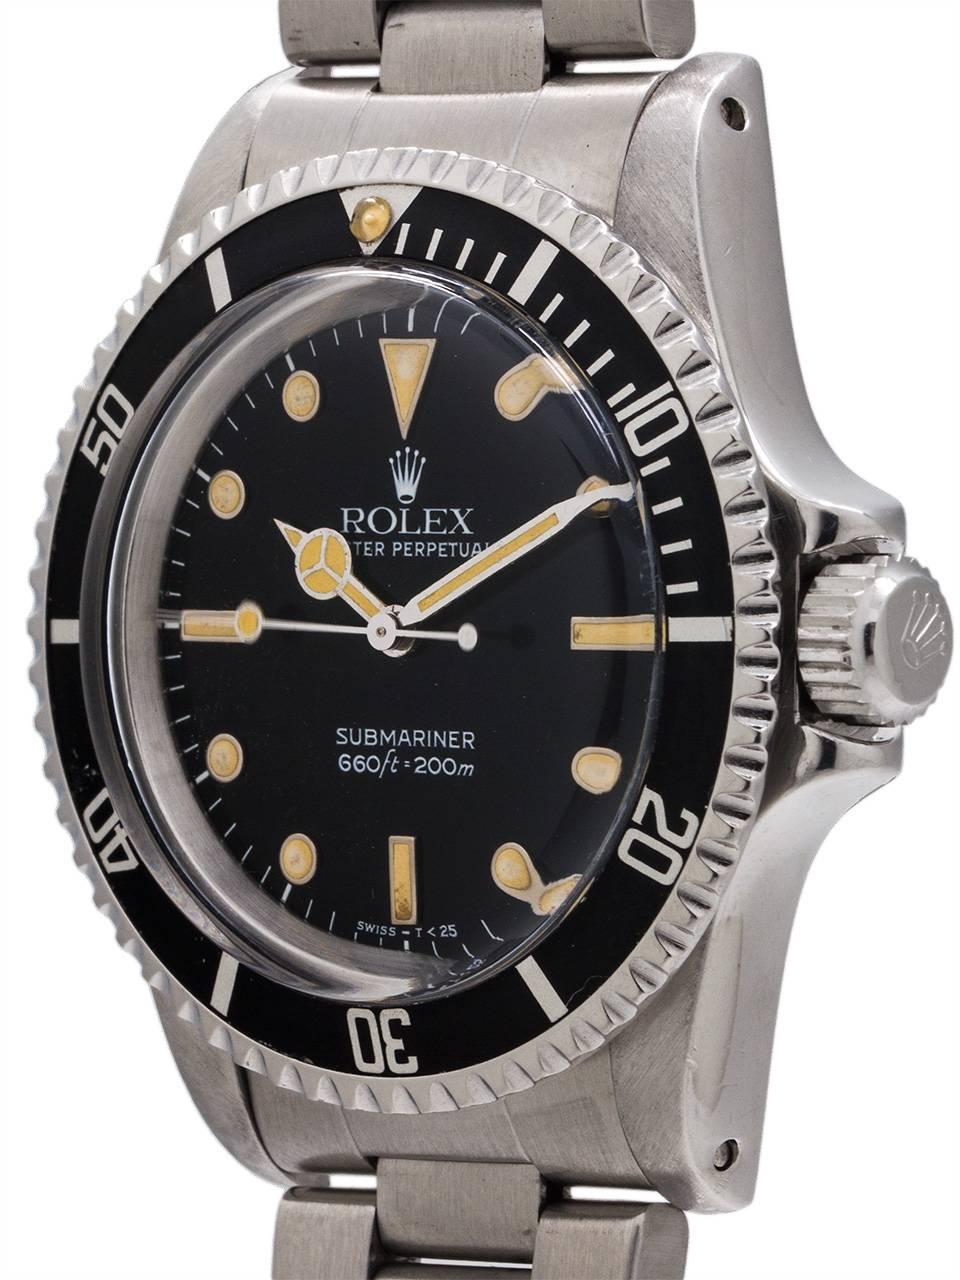 An amazing example late production plastic crystal ref 5513 no date Submariner model circa 1988 with beautifully patina’d luminous plots, matching hands, and bezel pearl. Featuring 40mm diameter case with bi-directional elapsed time bezel, domed